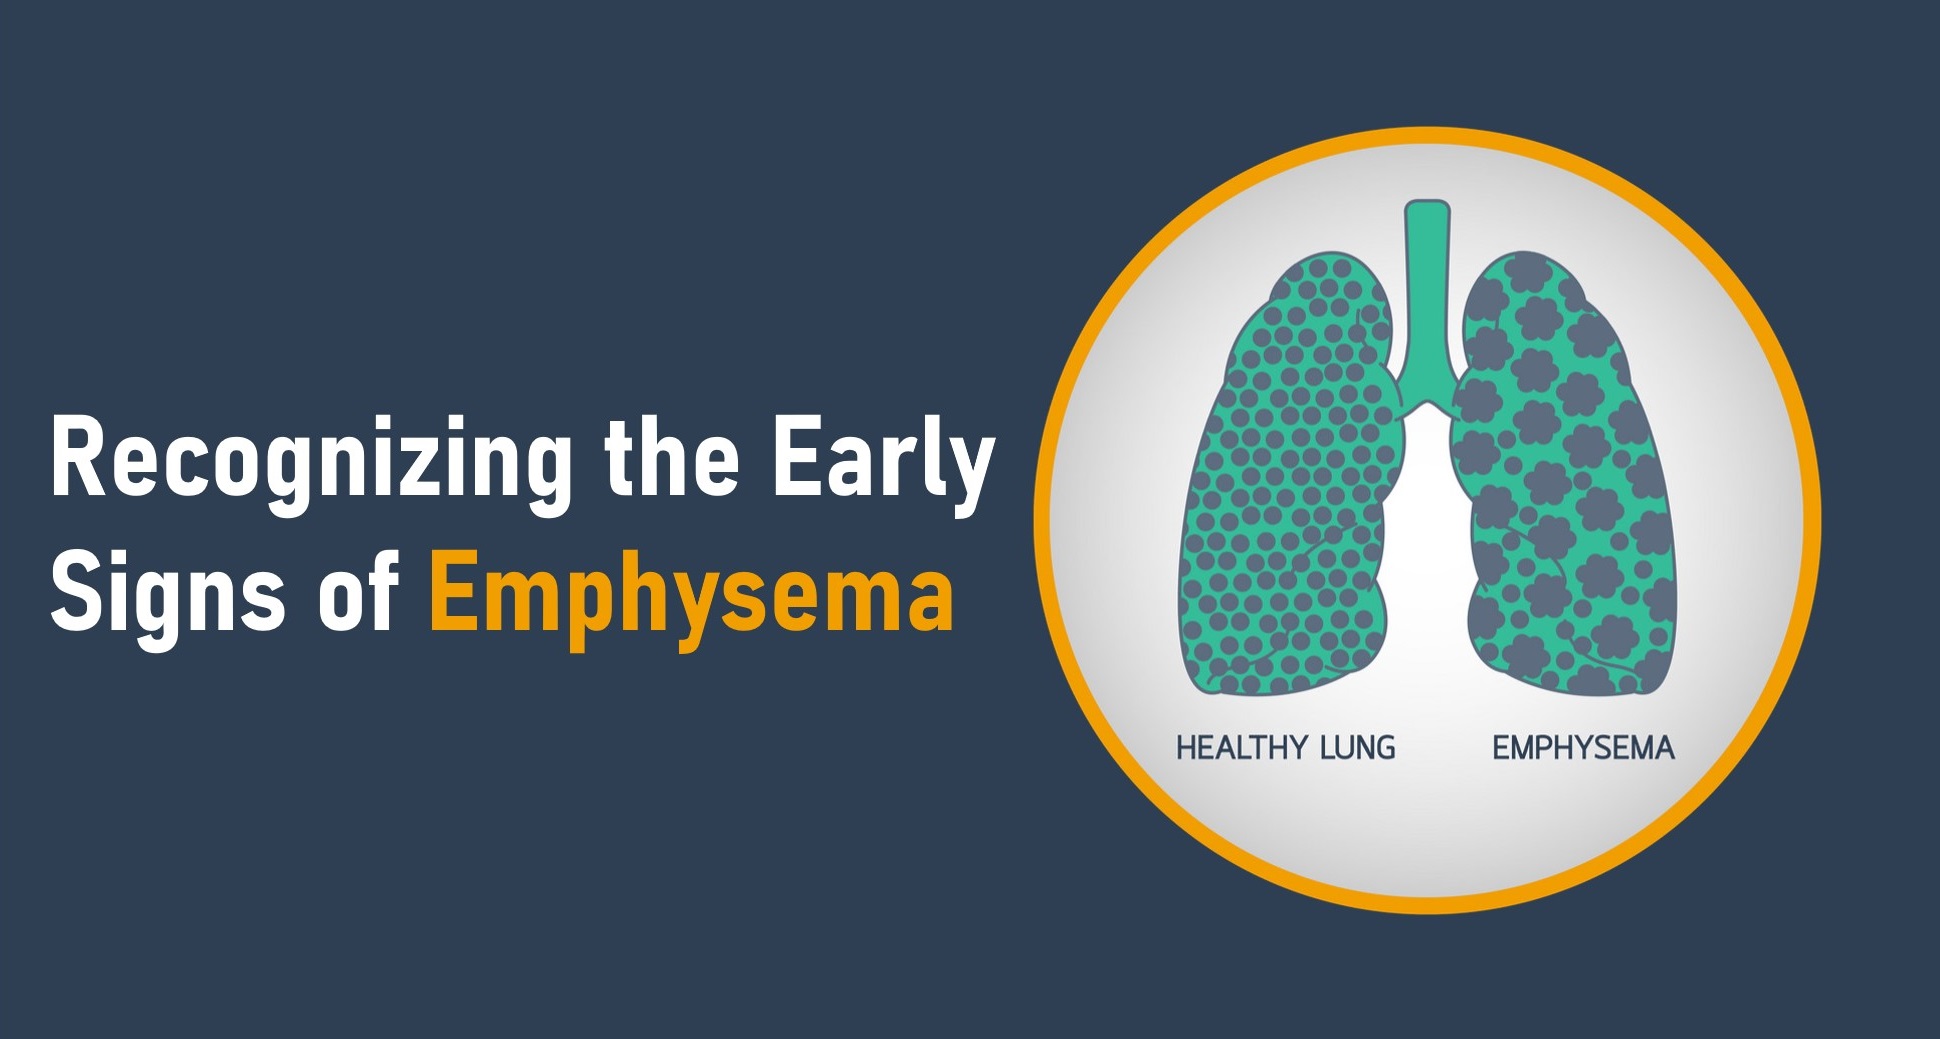 Recognizing the Early Signs of Emphysema